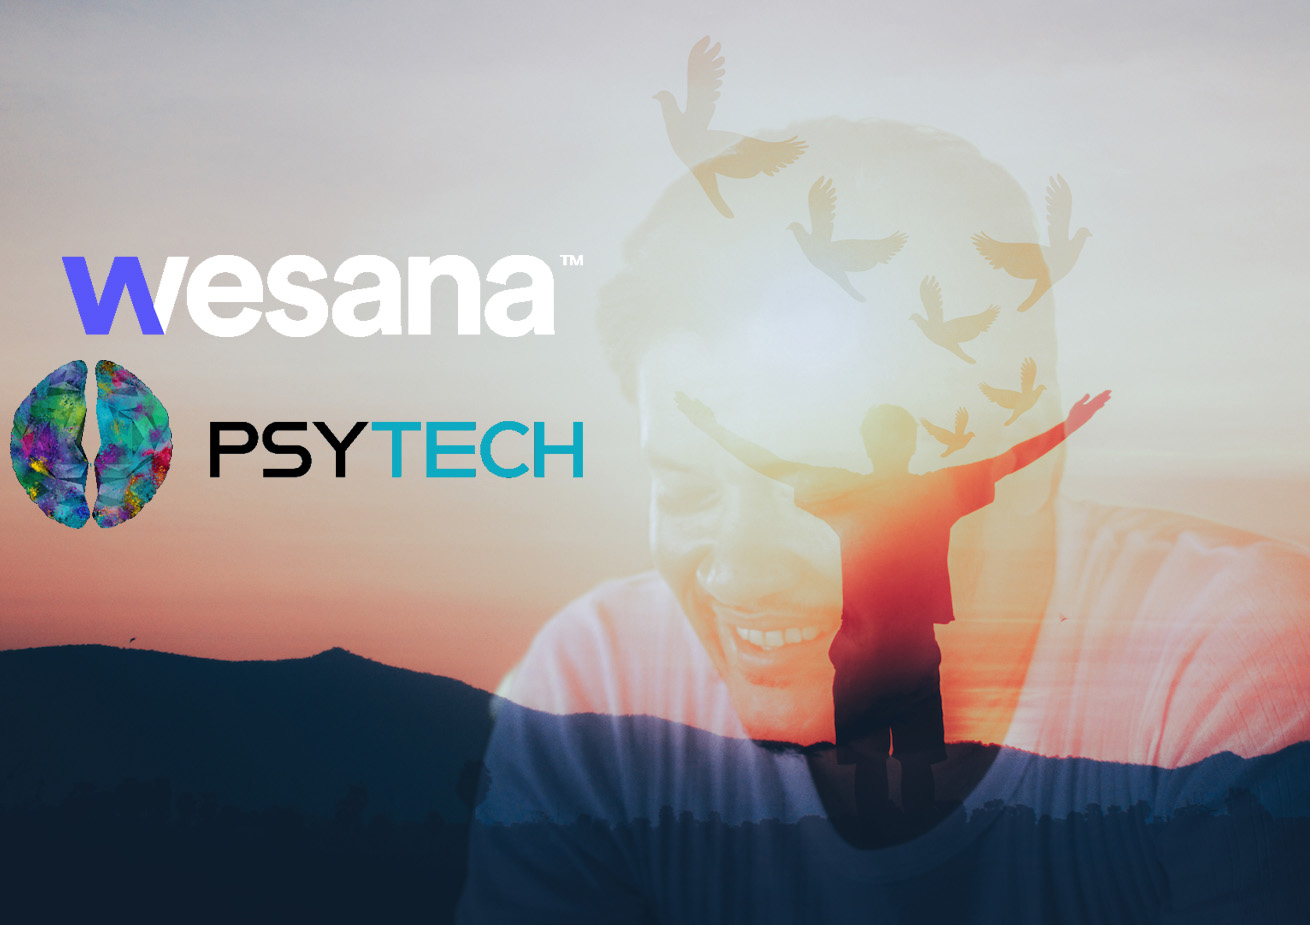 Wesana Health to Acquire Psytech